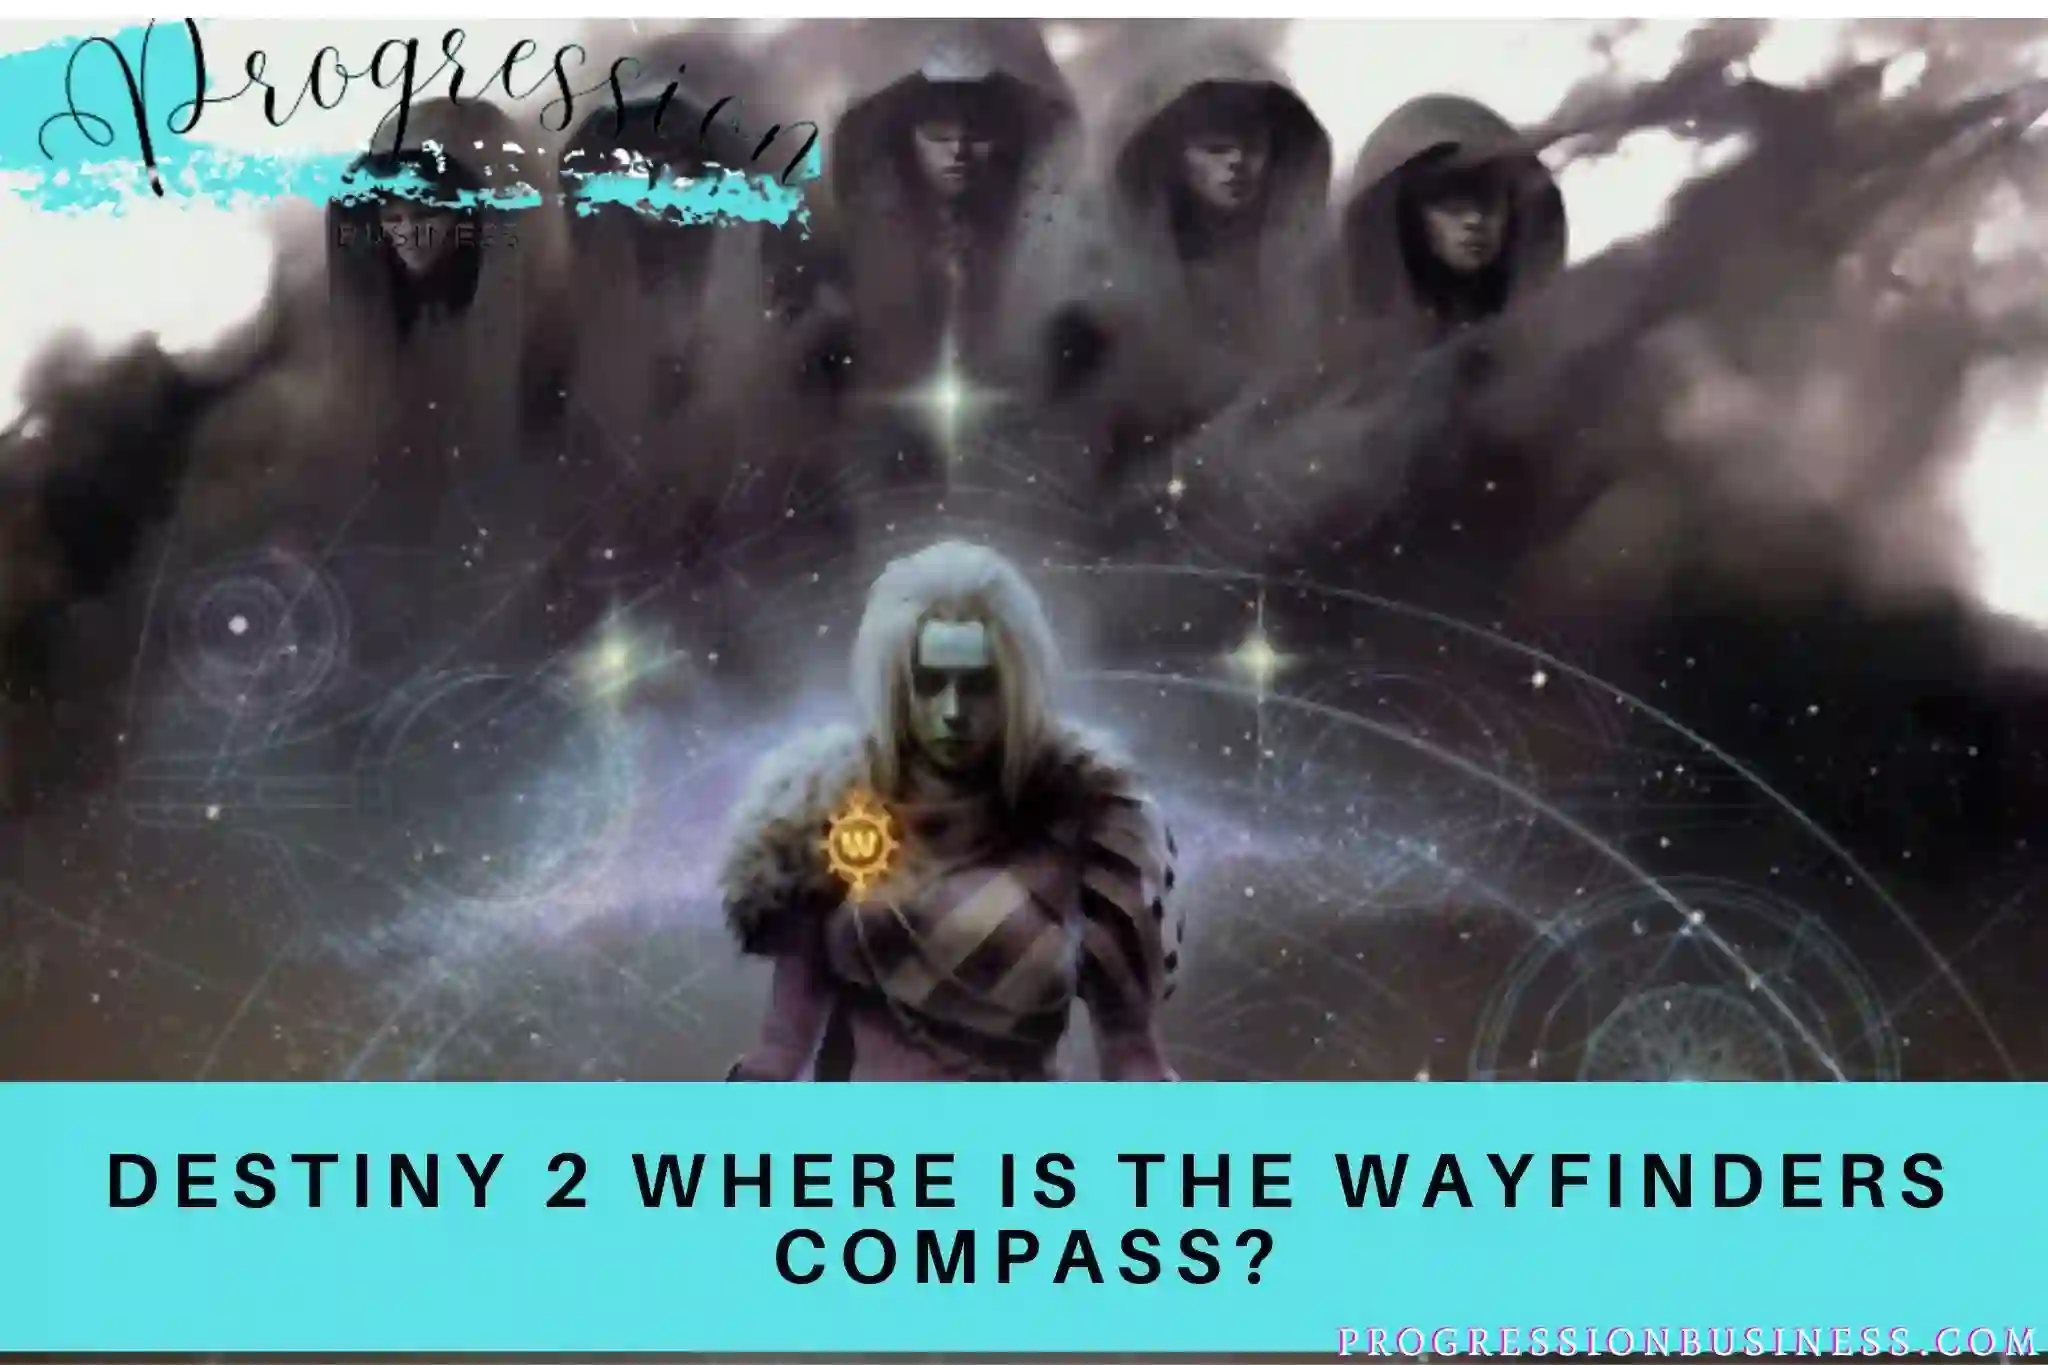 Destiny 2 Where Is The Wayfinders Compass?